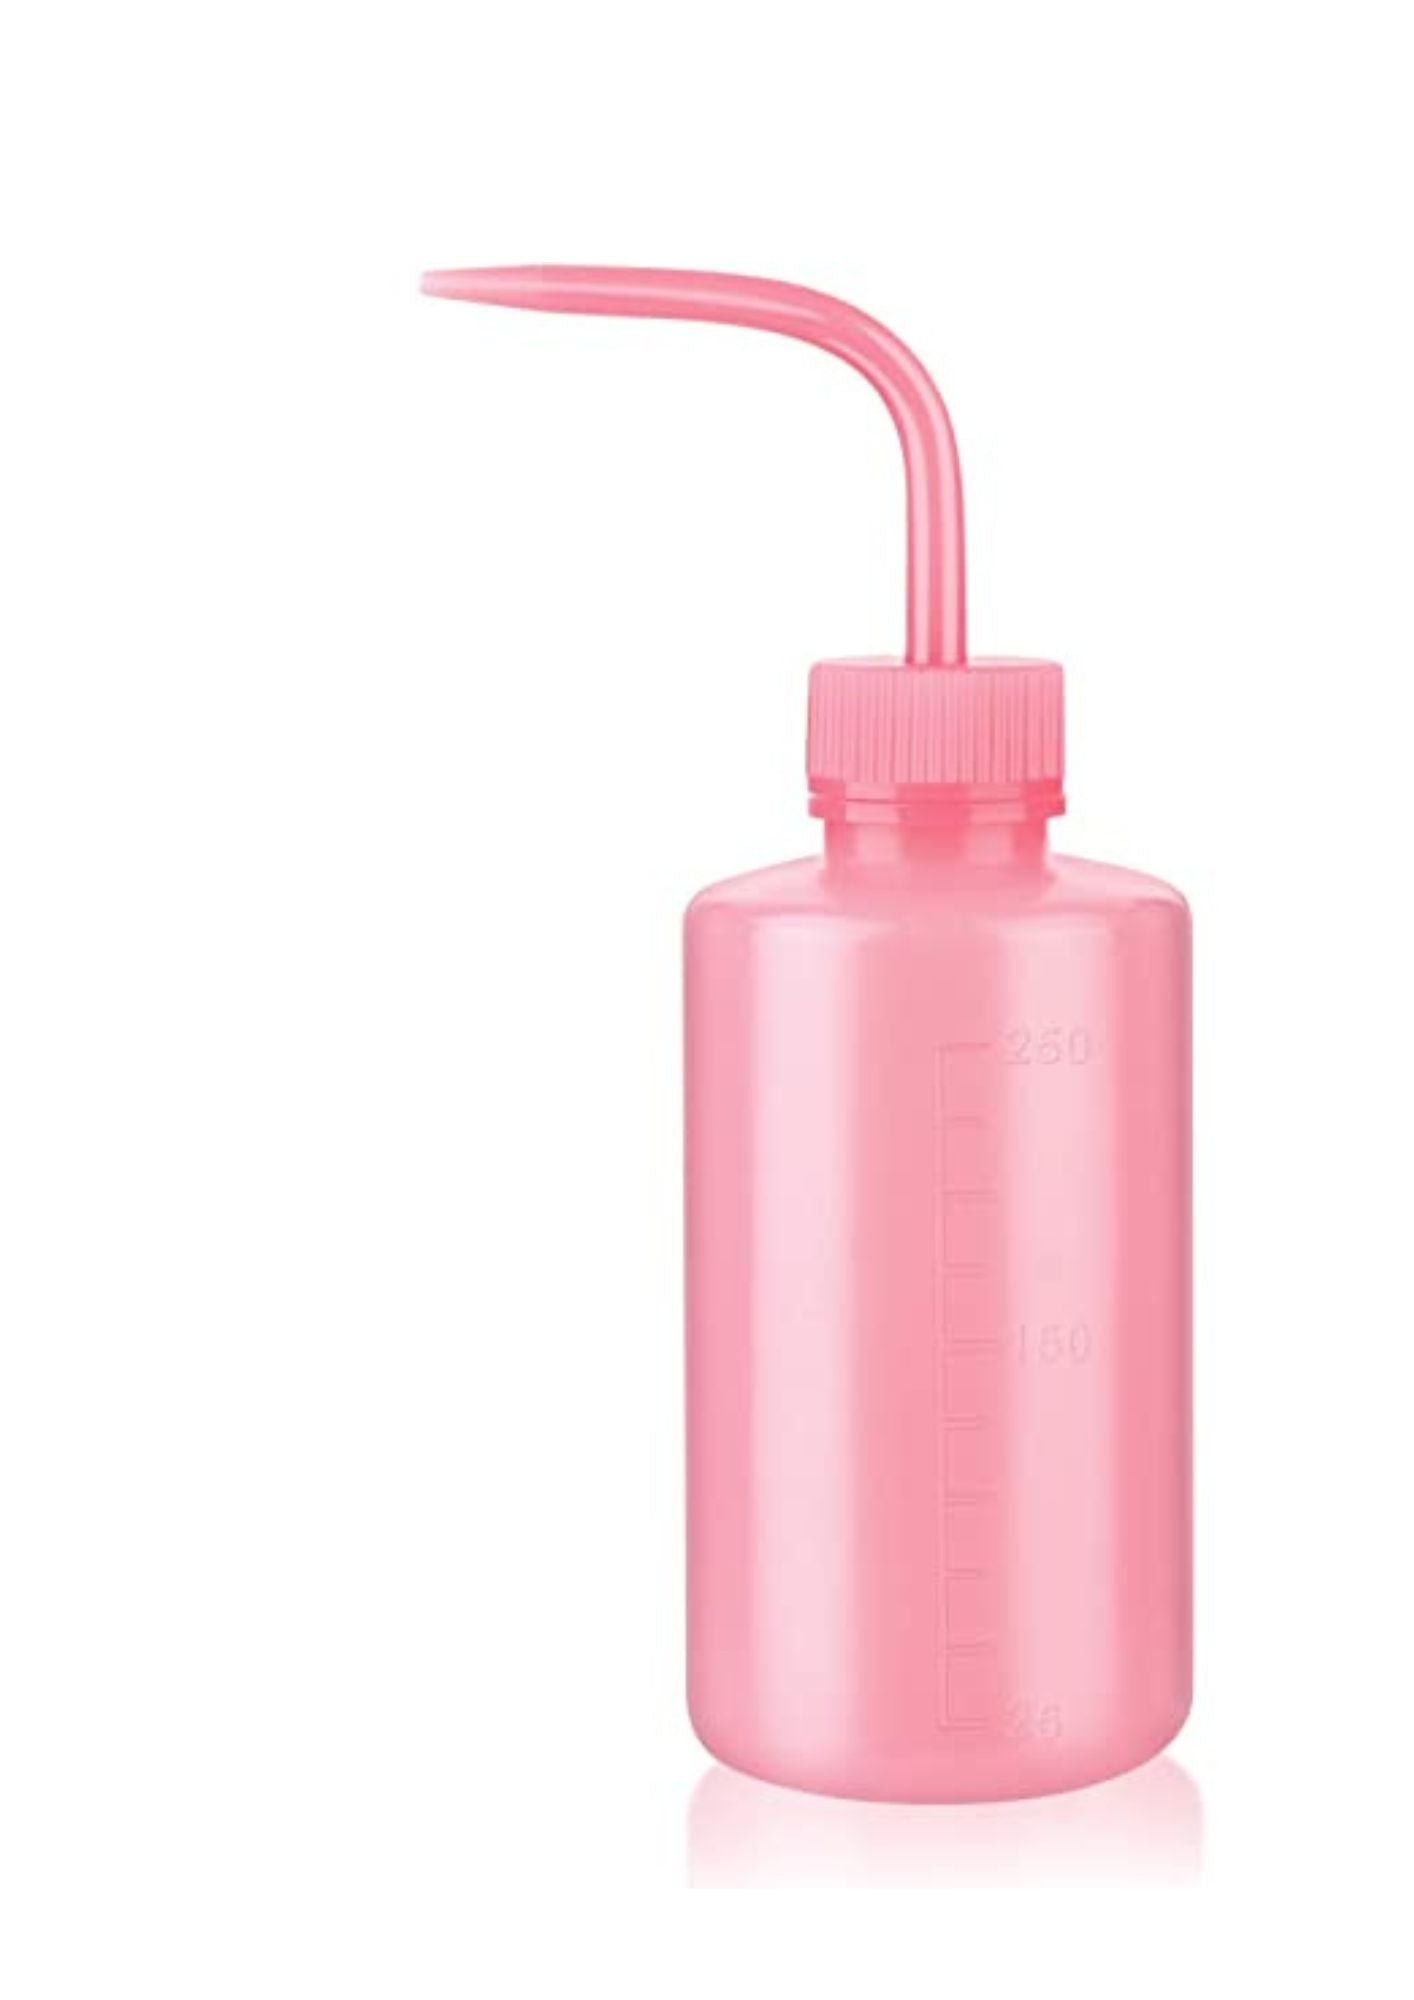 PINK SQUEEZE BOTTLE